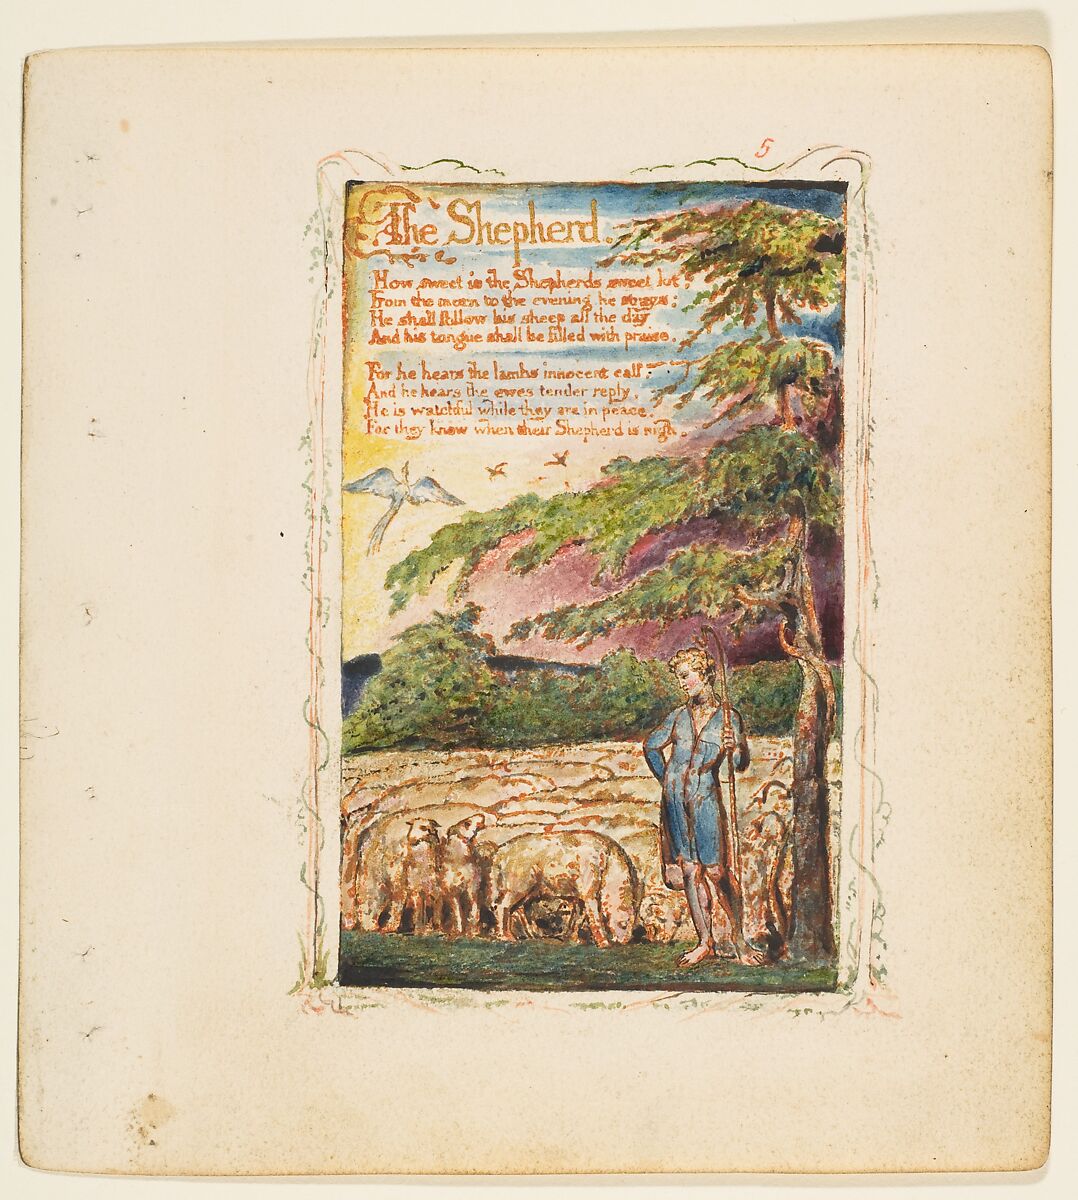 Songs of Innocence: The Shepherd, William Blake, Relief etching printed in orange-brown ink and hand-colored with watercolor and shell gold